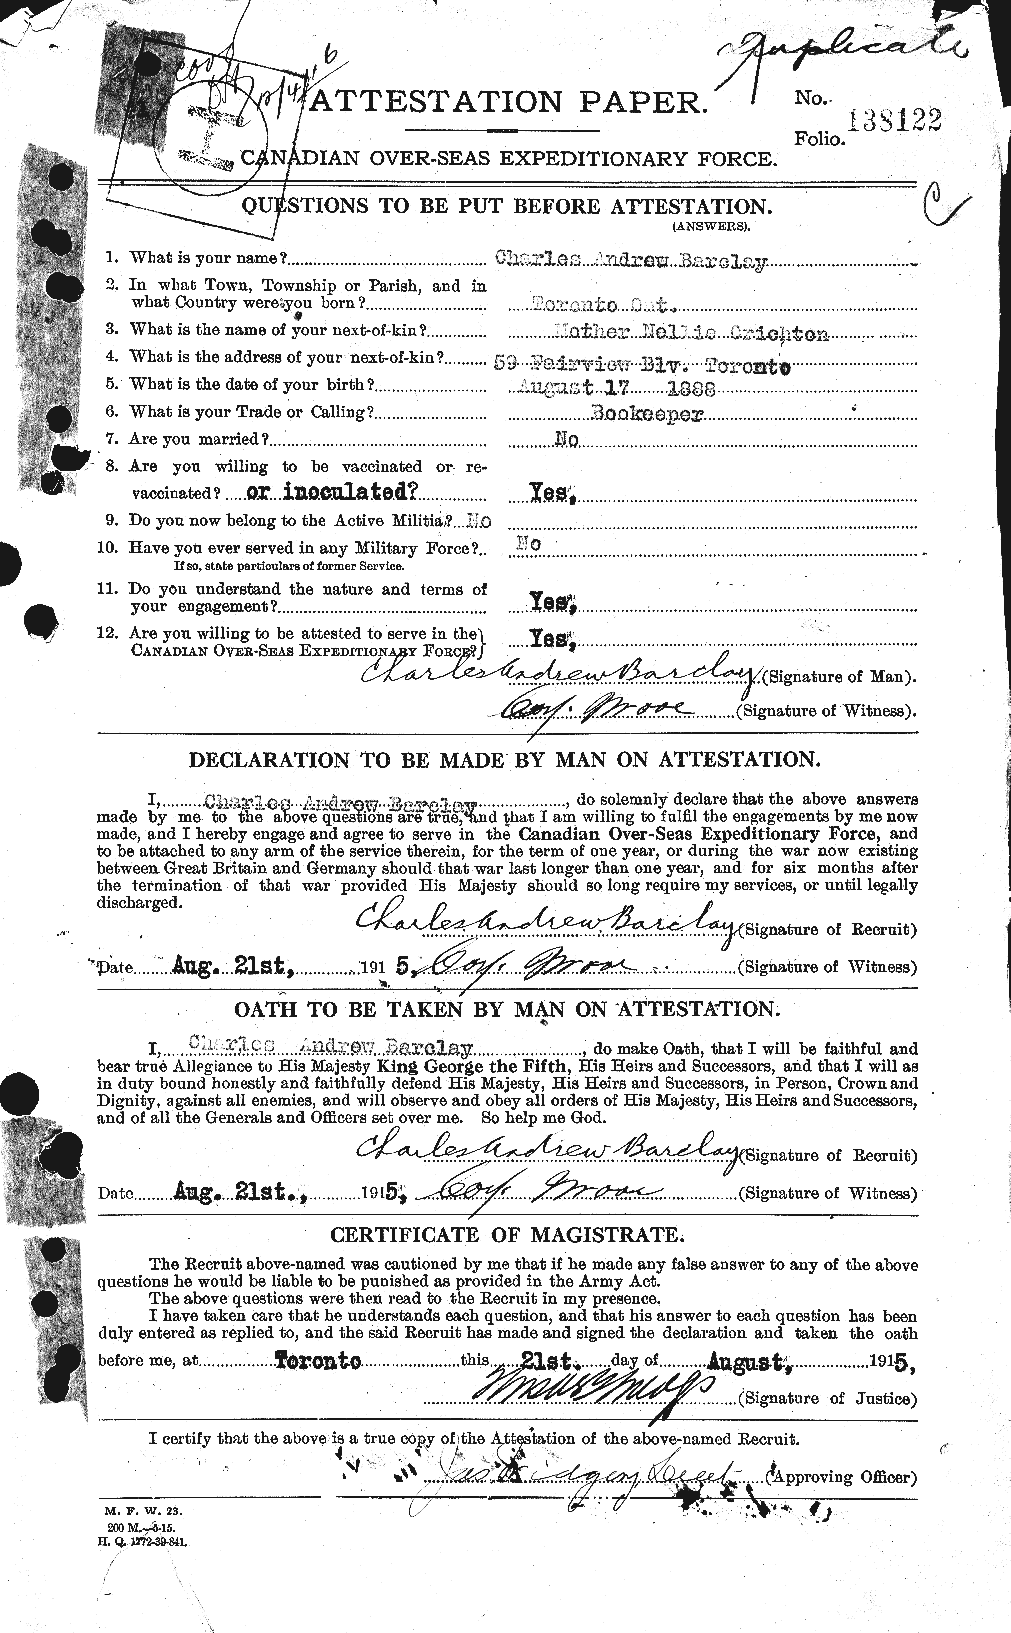 Personnel Records of the First World War - CEF 220953a